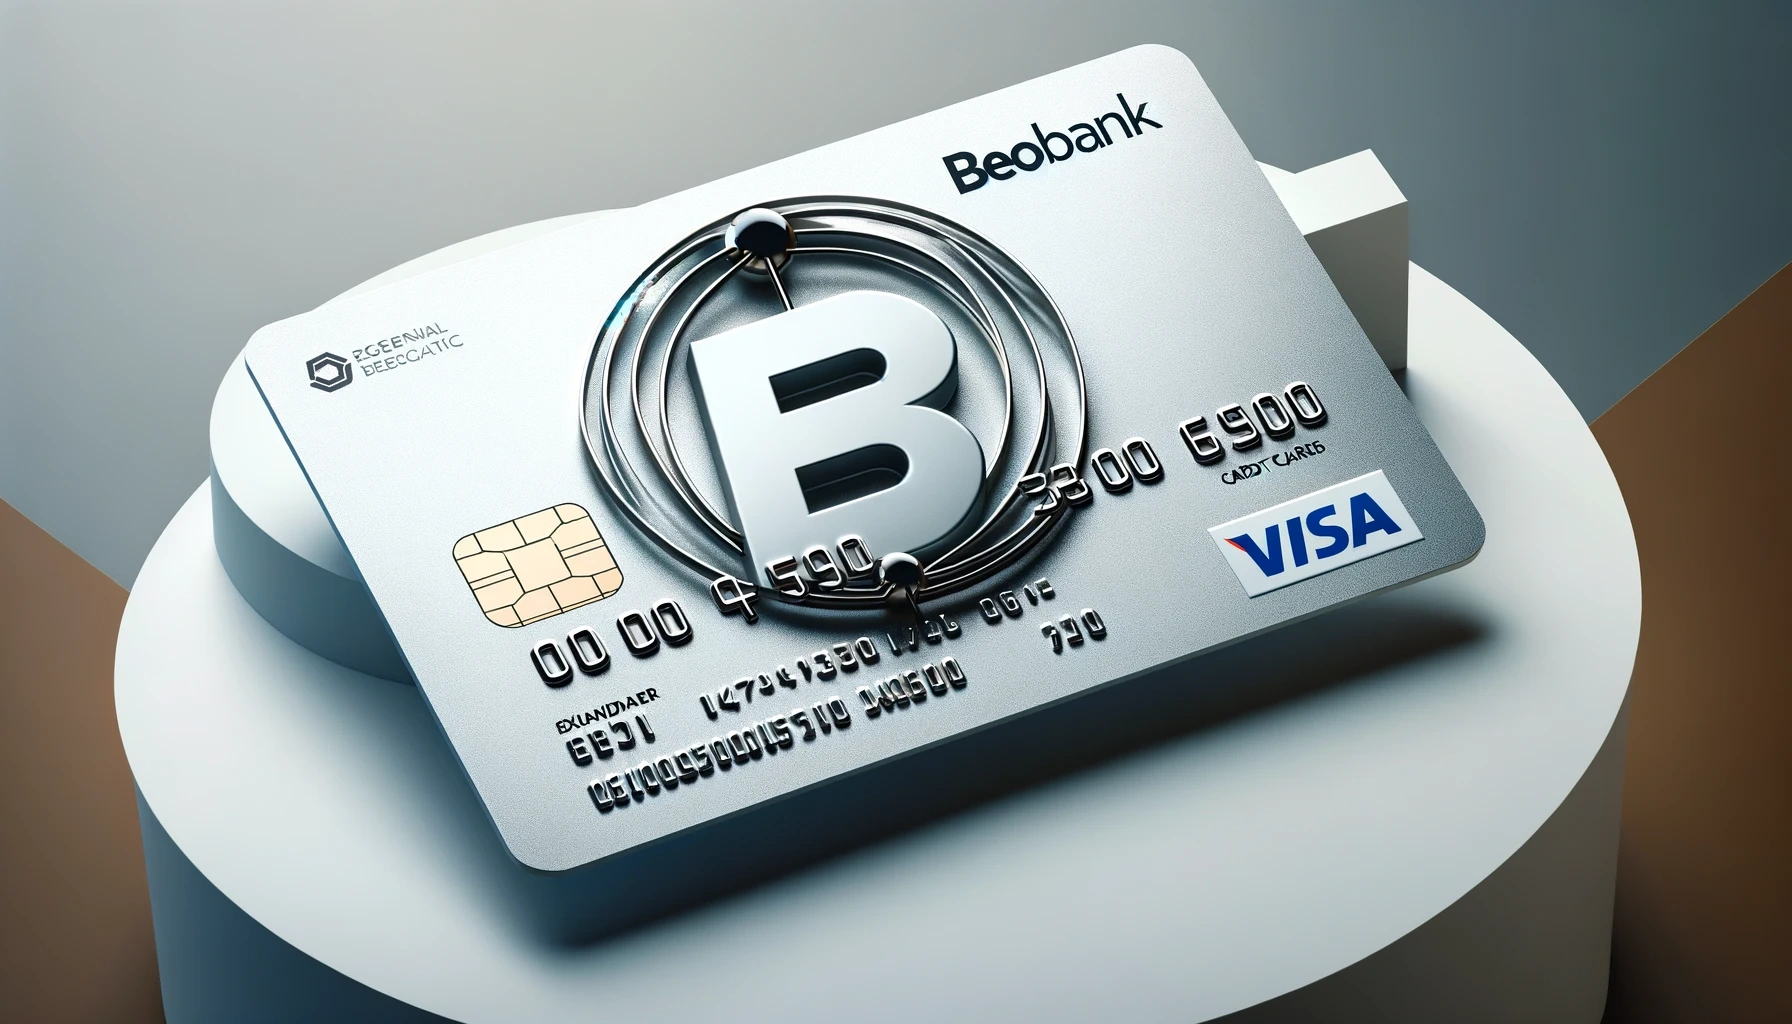 How to Apply for Q8 Beobank Credit Card in Belgium